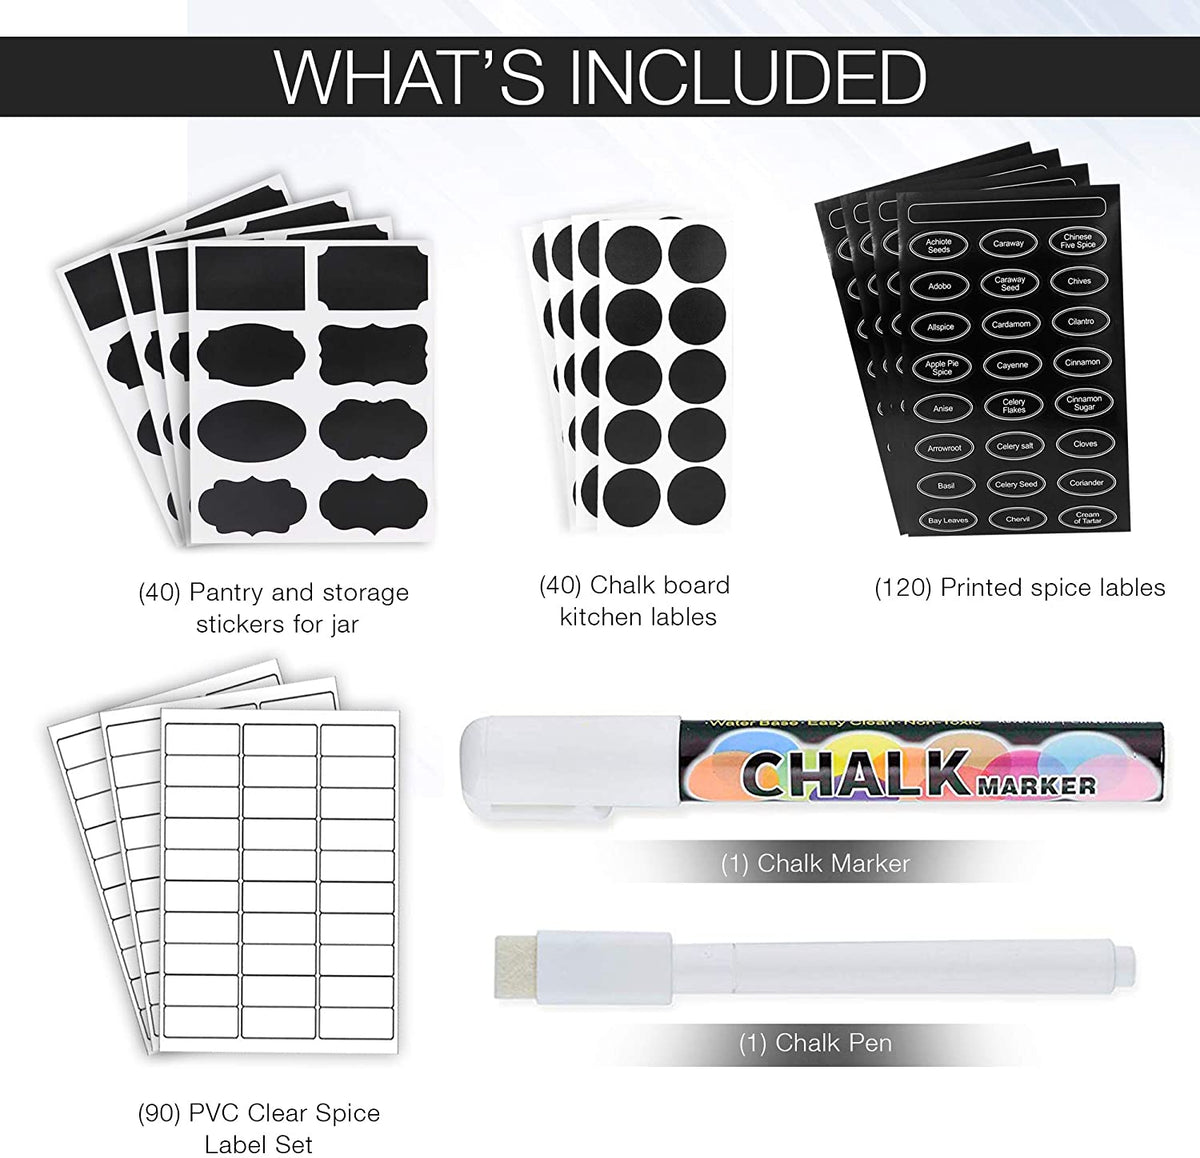 173 Chalkboard Label Stickers with 2 Chalk Markers Pen, Black Chalk Labels  for Mason Jars, Pantry Containers, Glass Bottles, Kitchen Food Spice